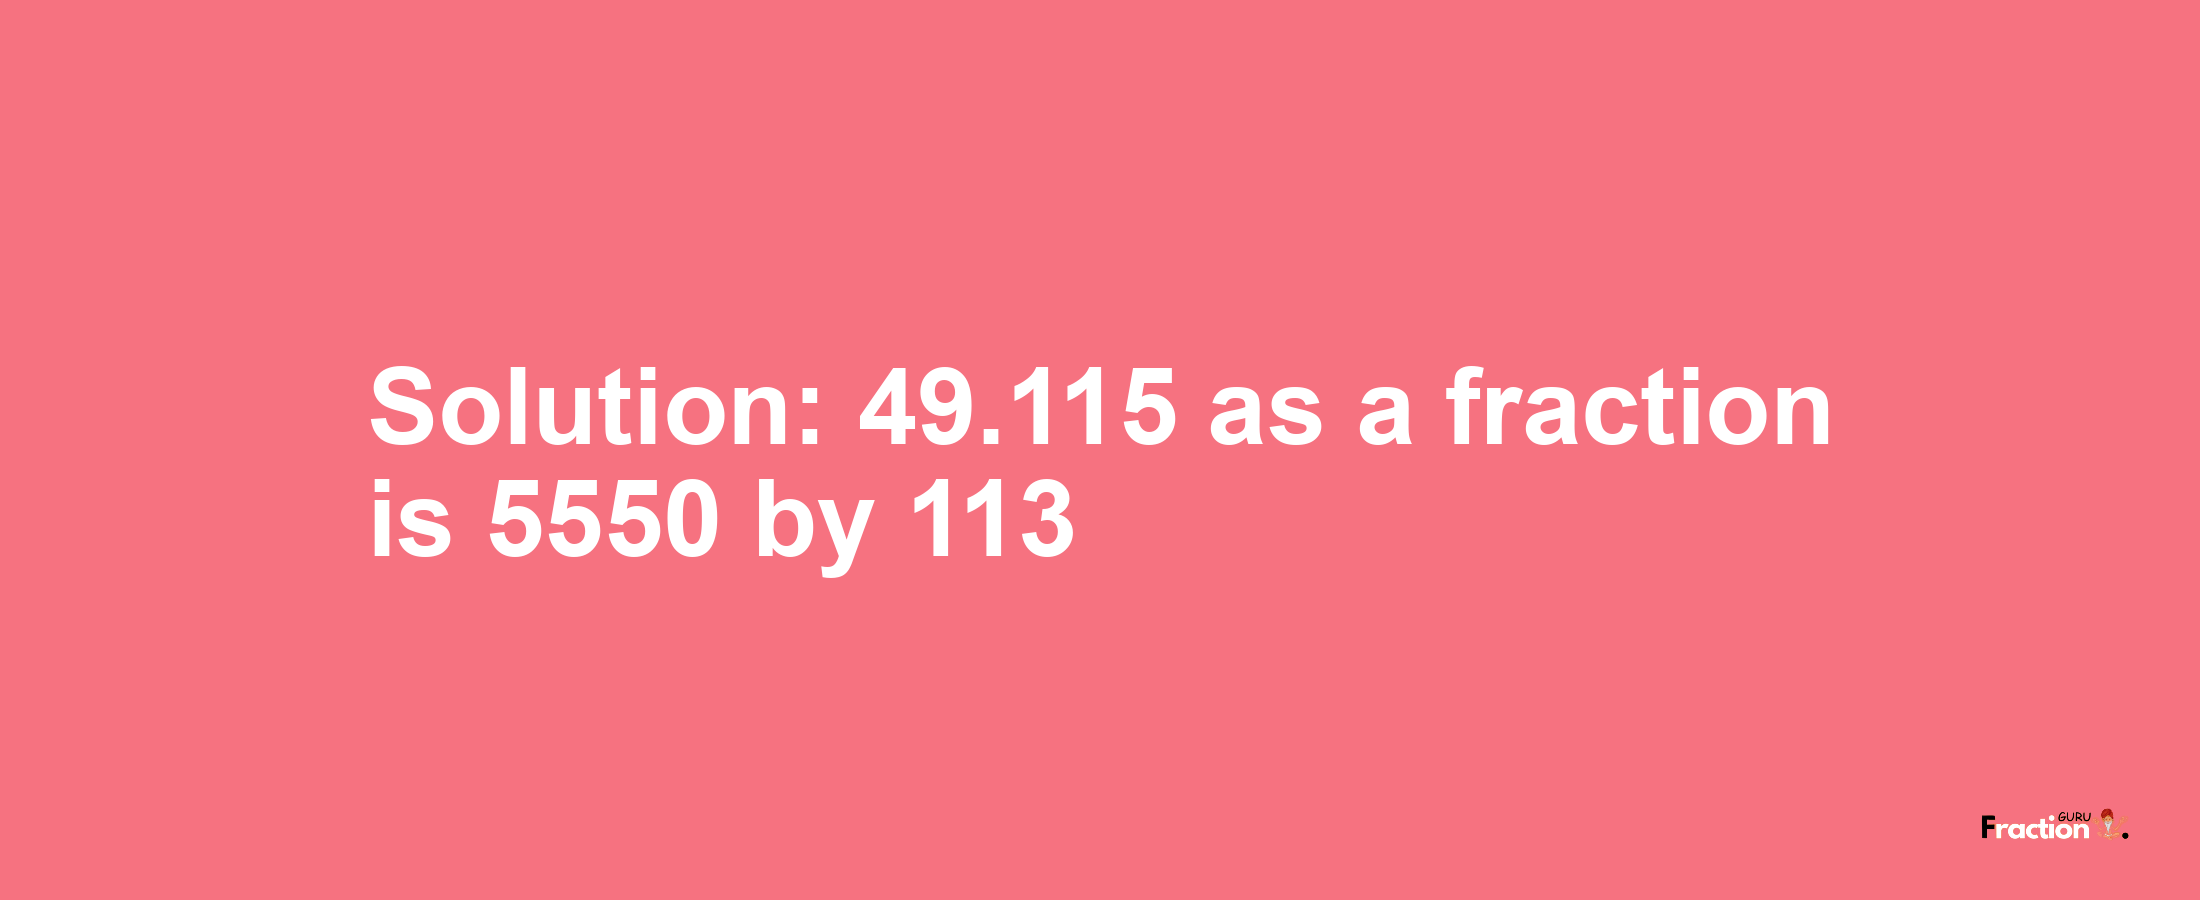 Solution:49.115 as a fraction is 5550/113